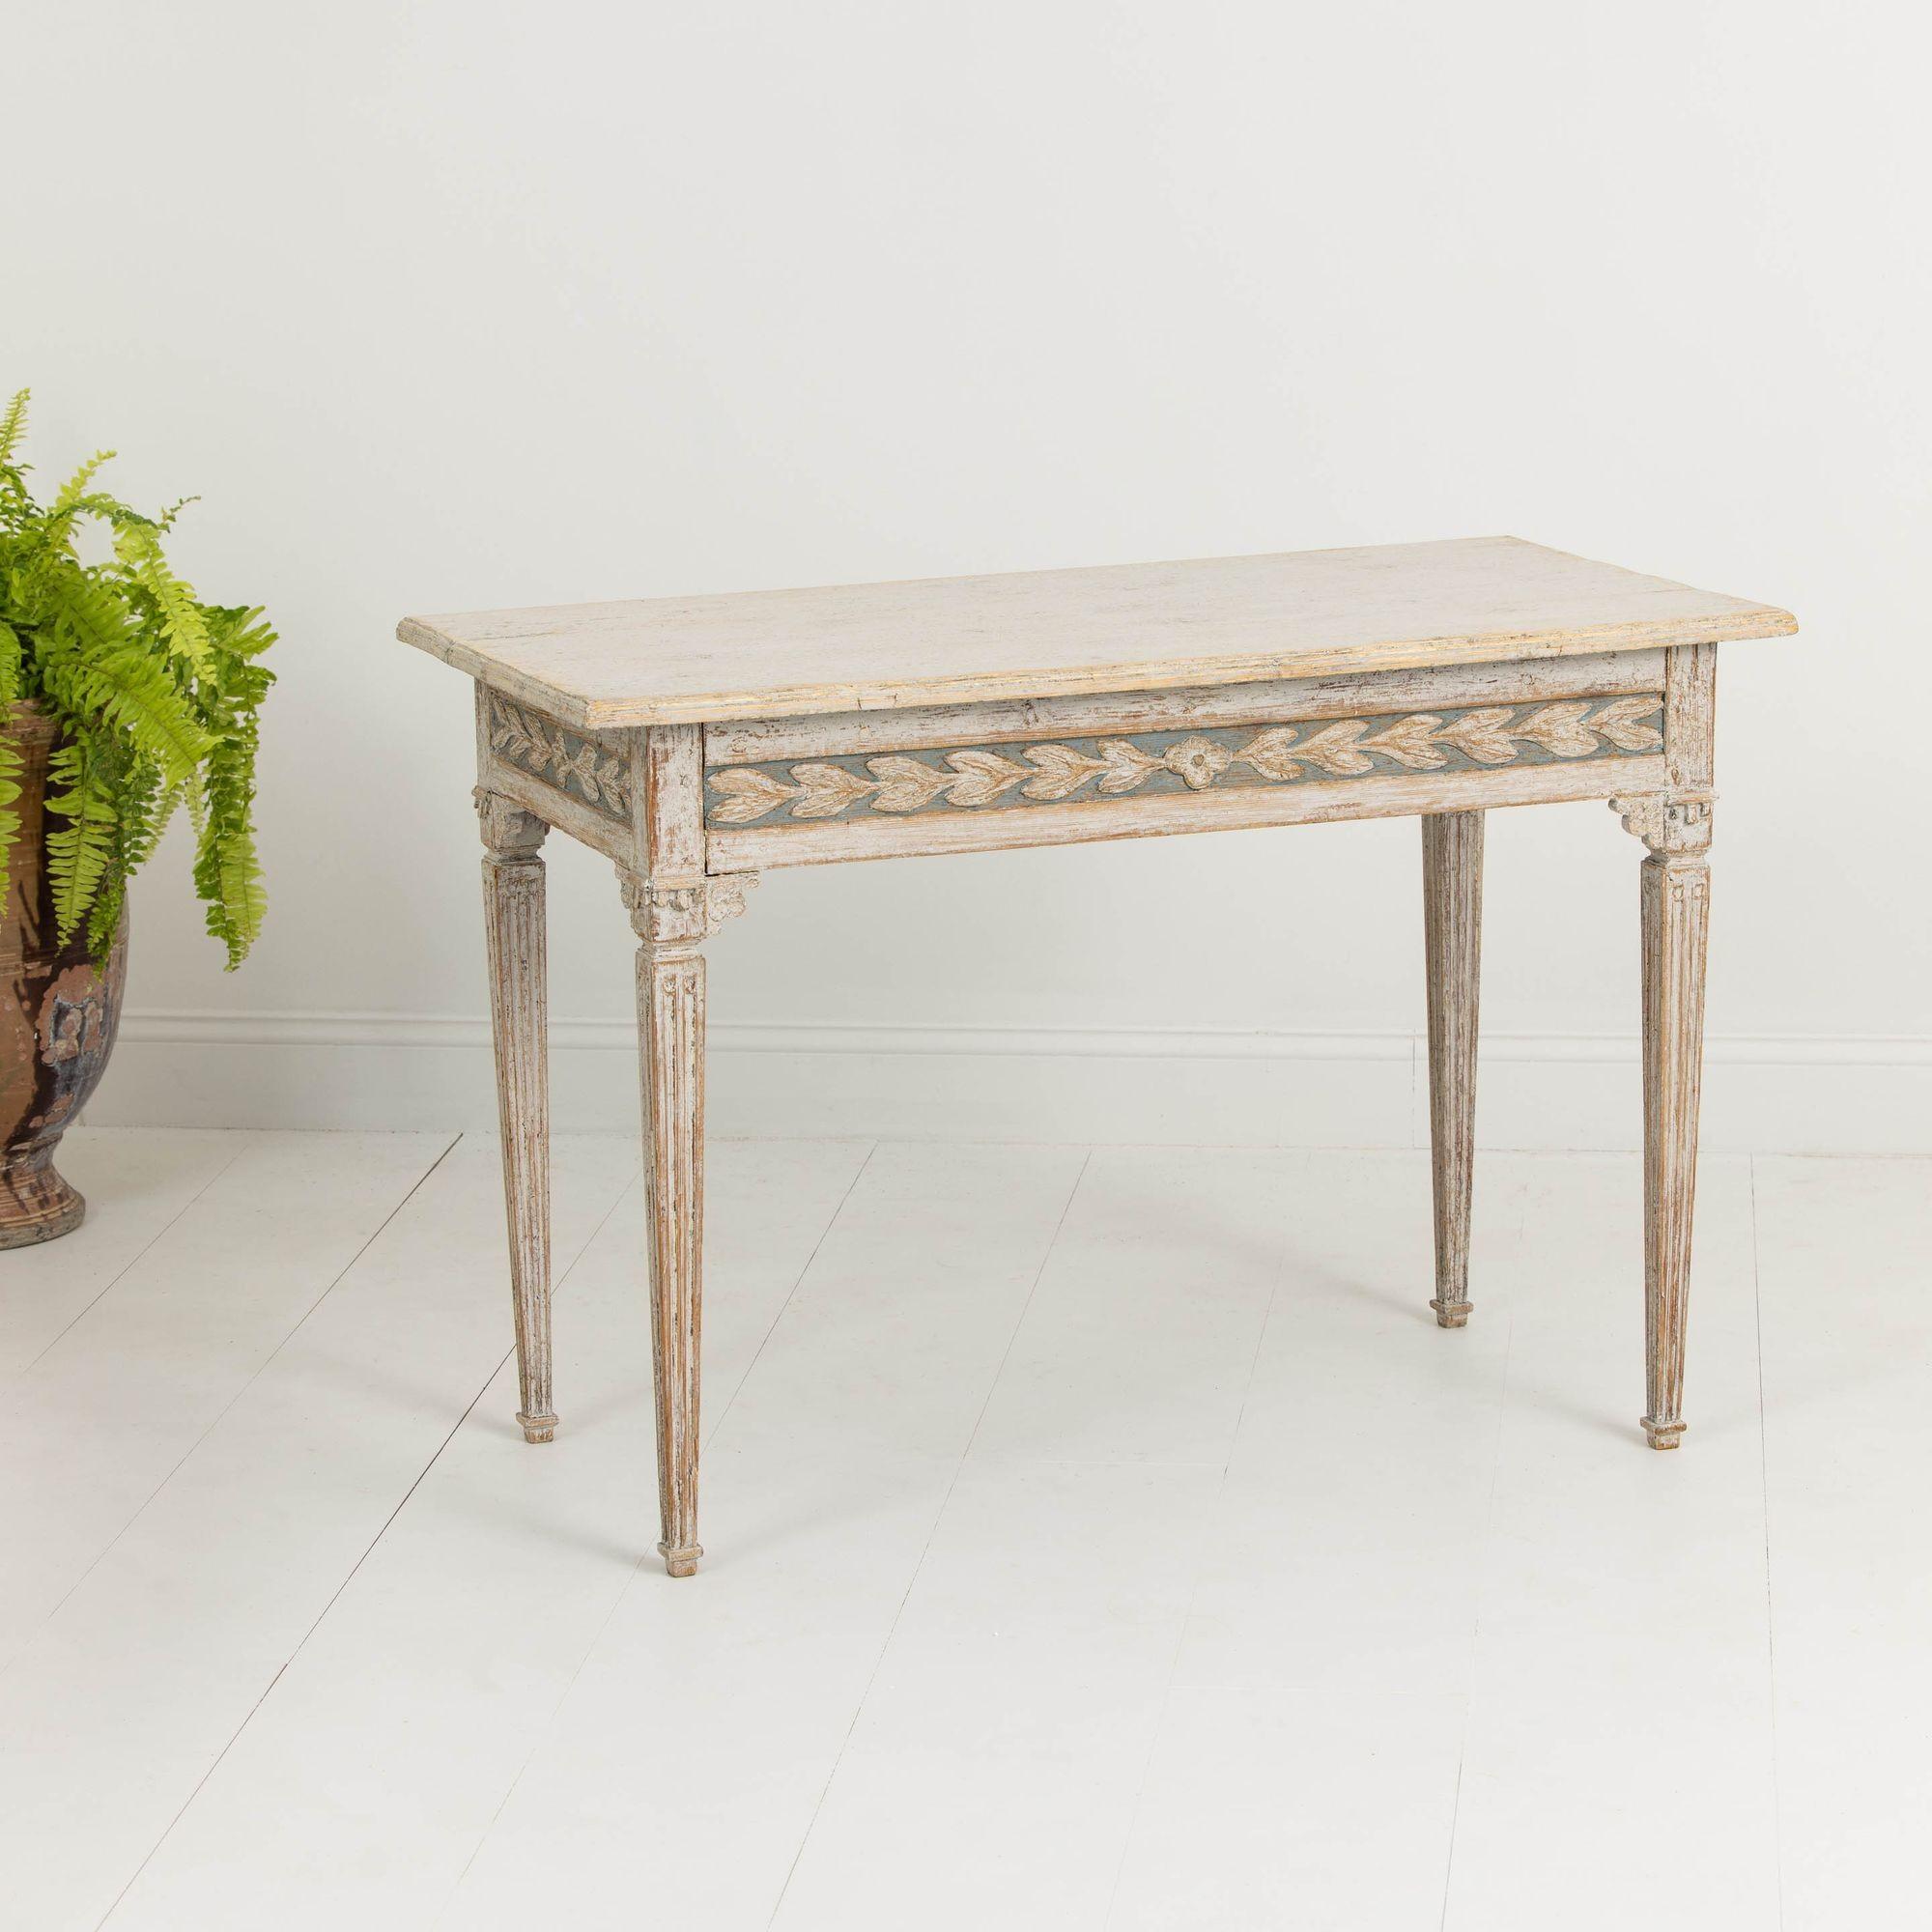 A beautiful console table from the Gustavian period finished on all four sides with bell flowers around the apron, raised upon square, fluted legs. Circa 1780.